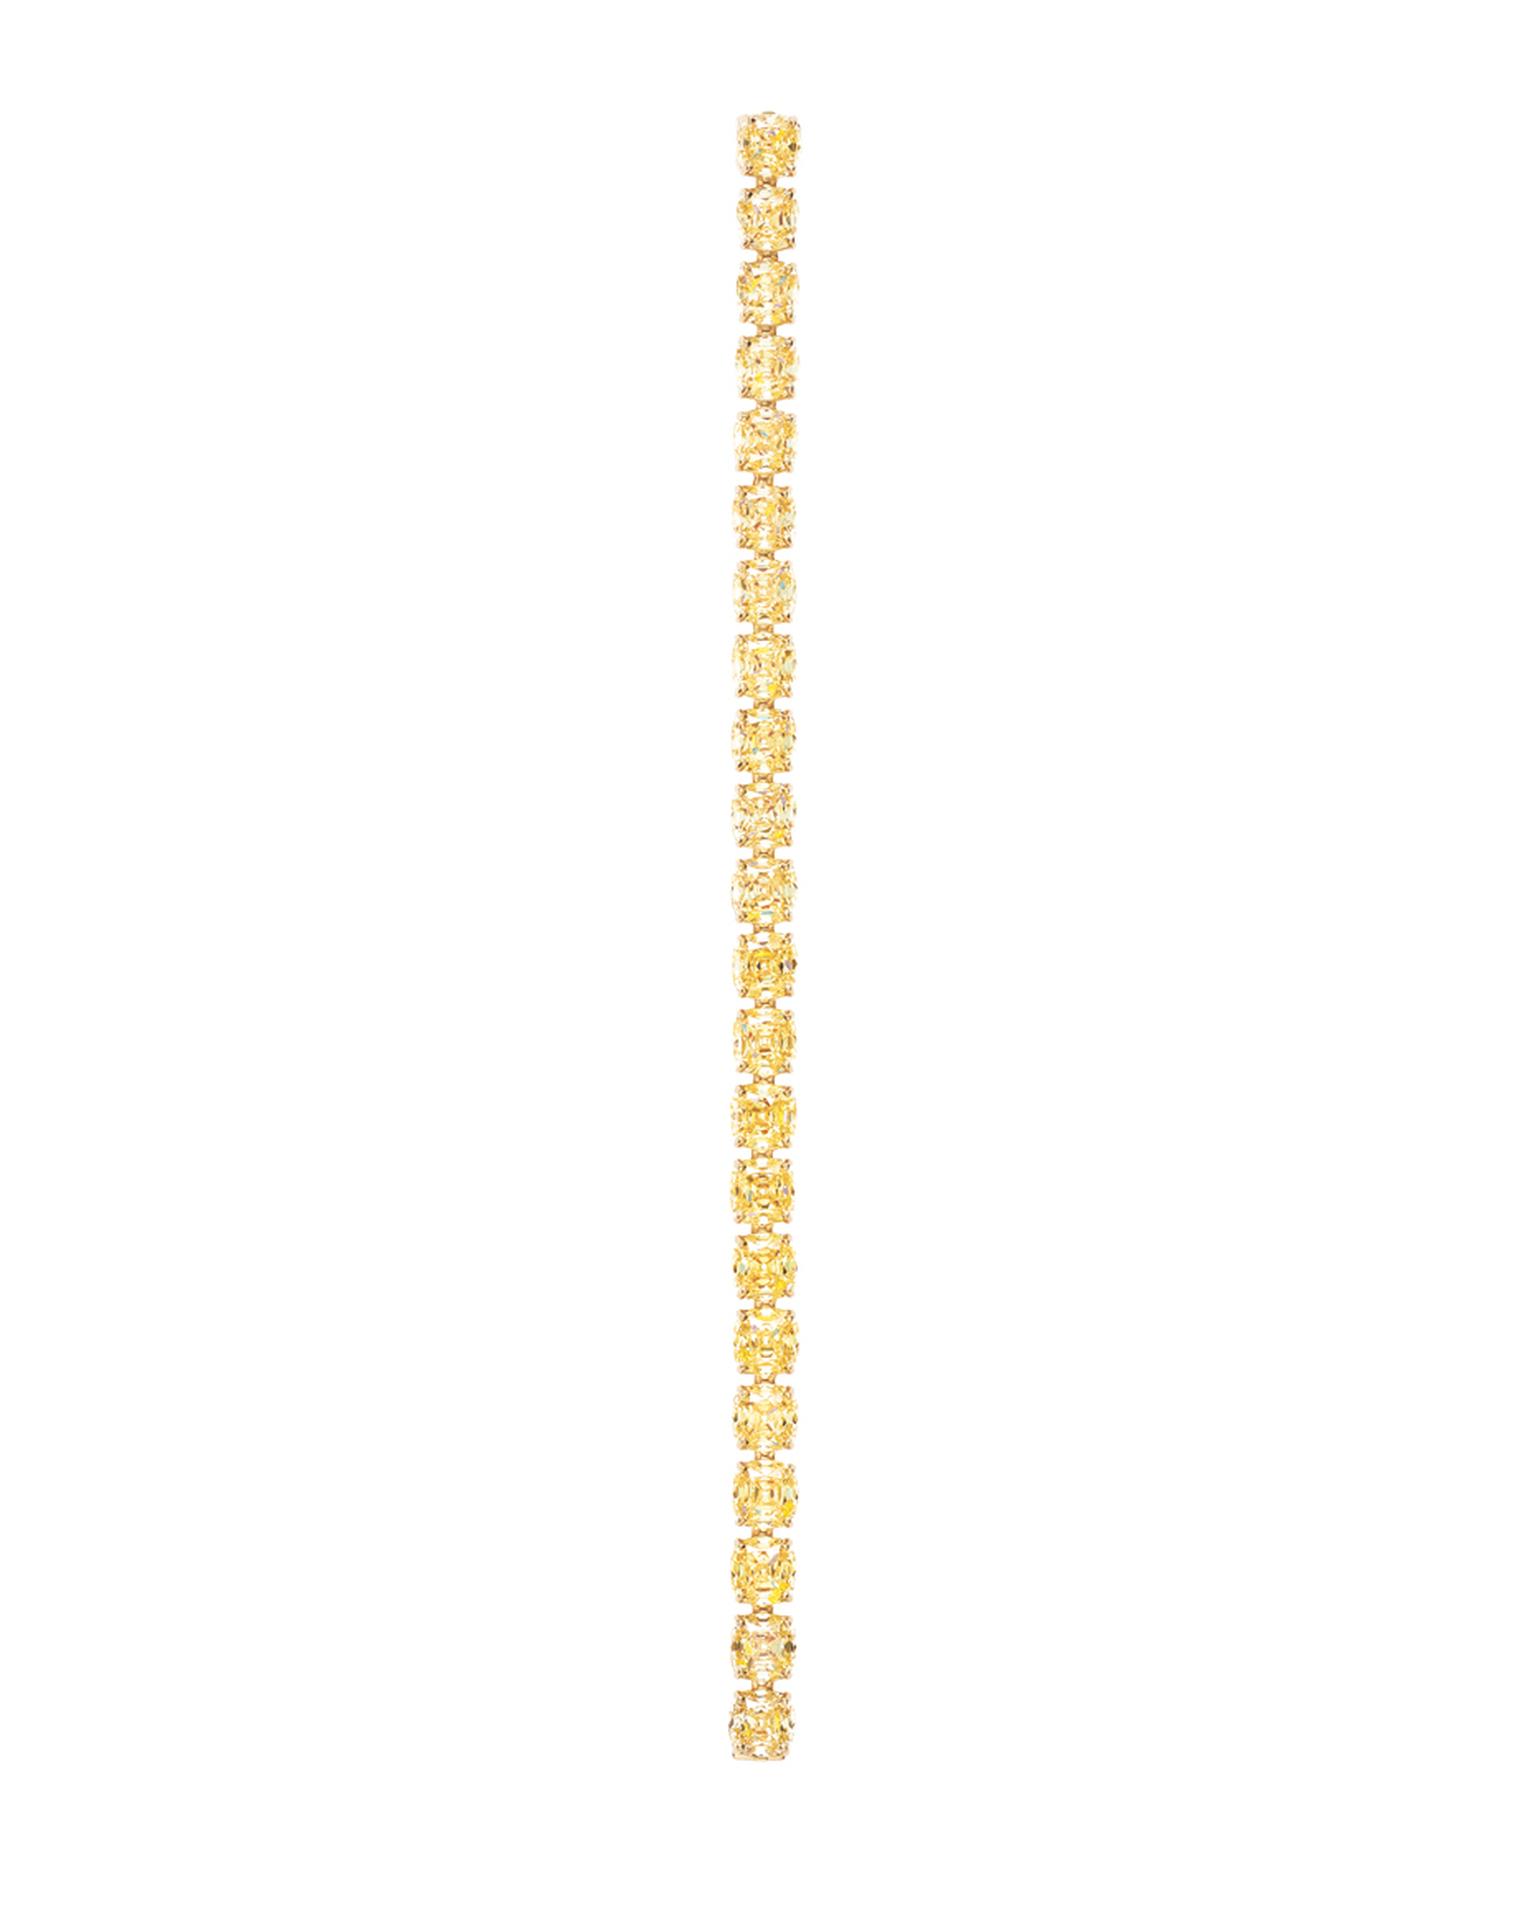 The Tiffany bracelet in yellow gold, set with Fancy Intense yellow diamonds, worn by Amy Adams for the Academy Awards 2014